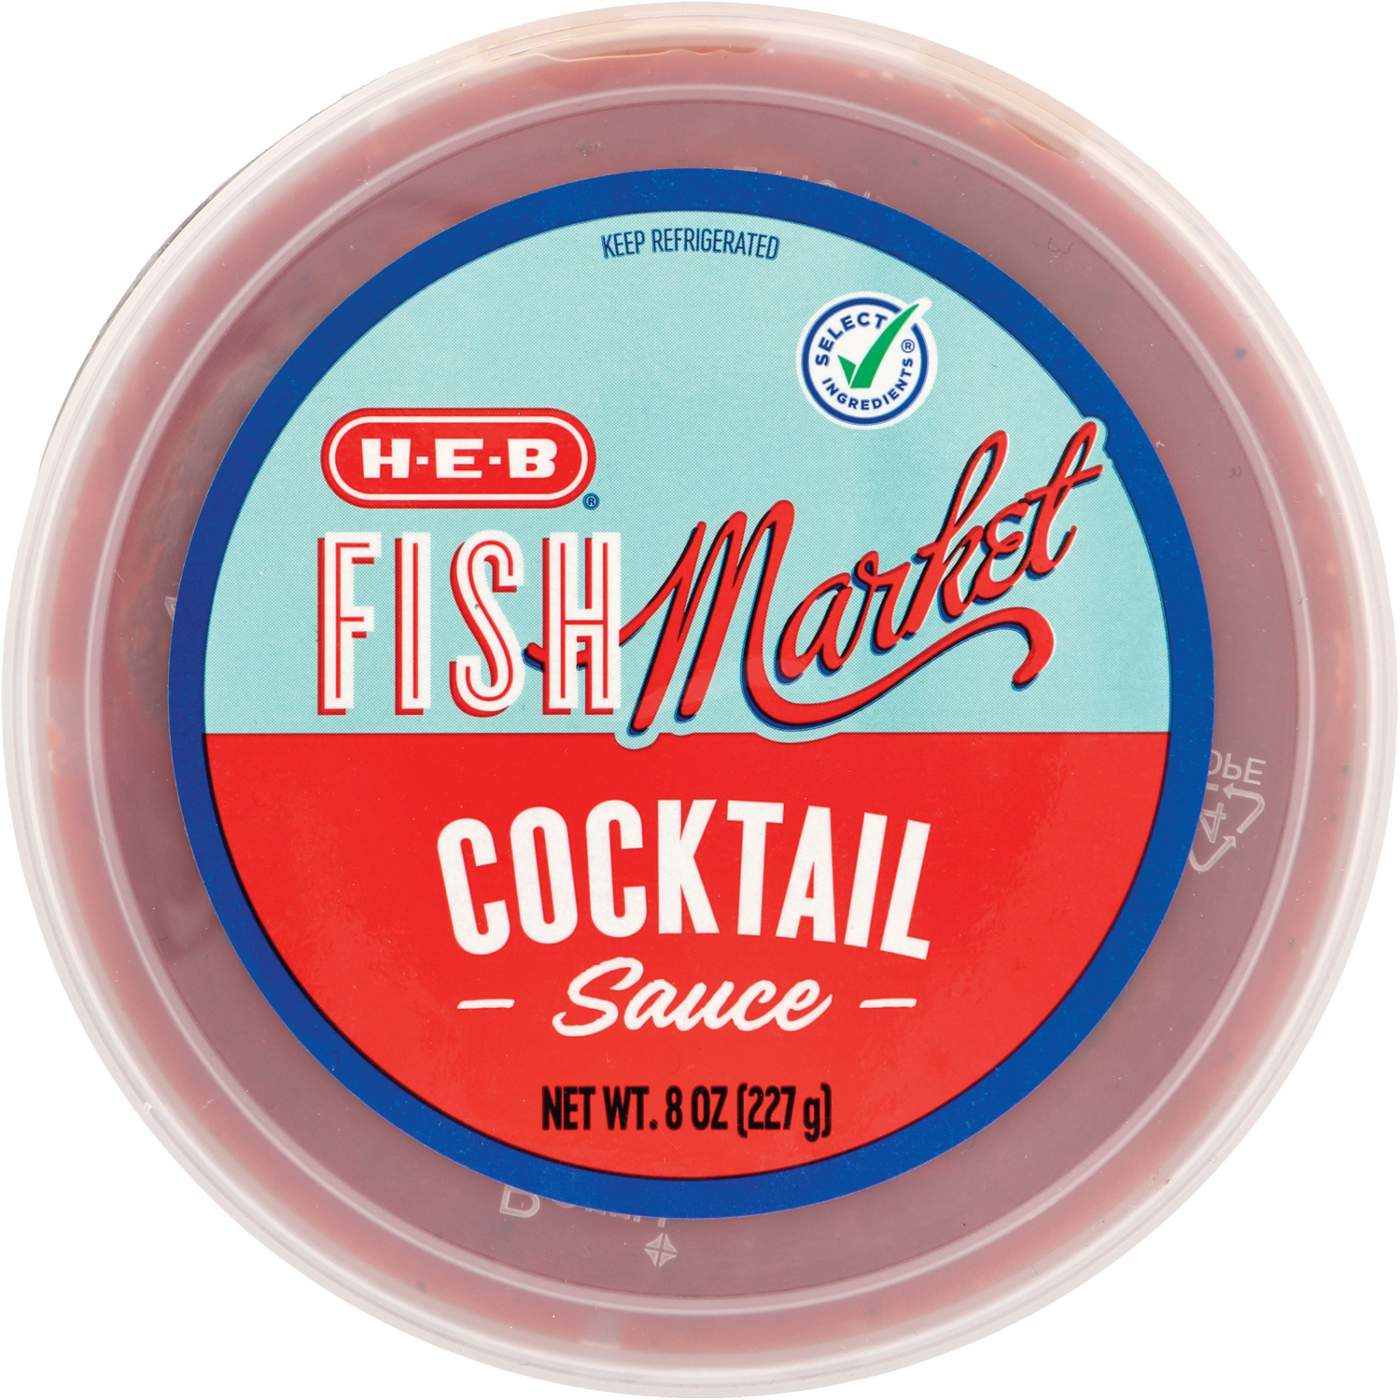 H-E-B Fish Market Cocktail Sauce (Sold Cold); image 1 of 2